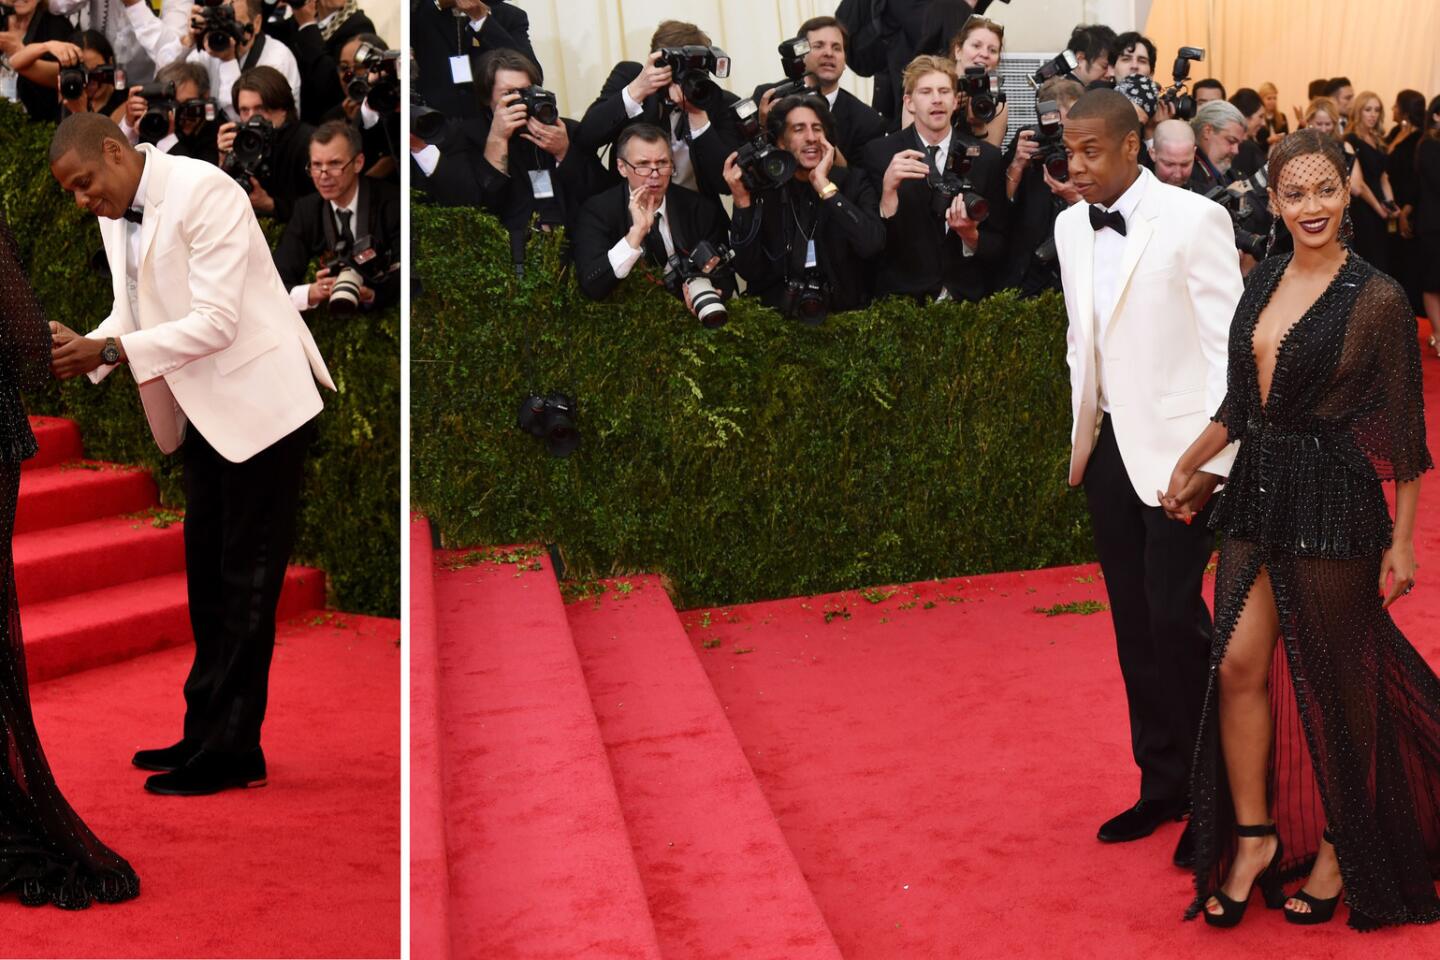 2014 Met Ball couples | Beyonce and Jay Z